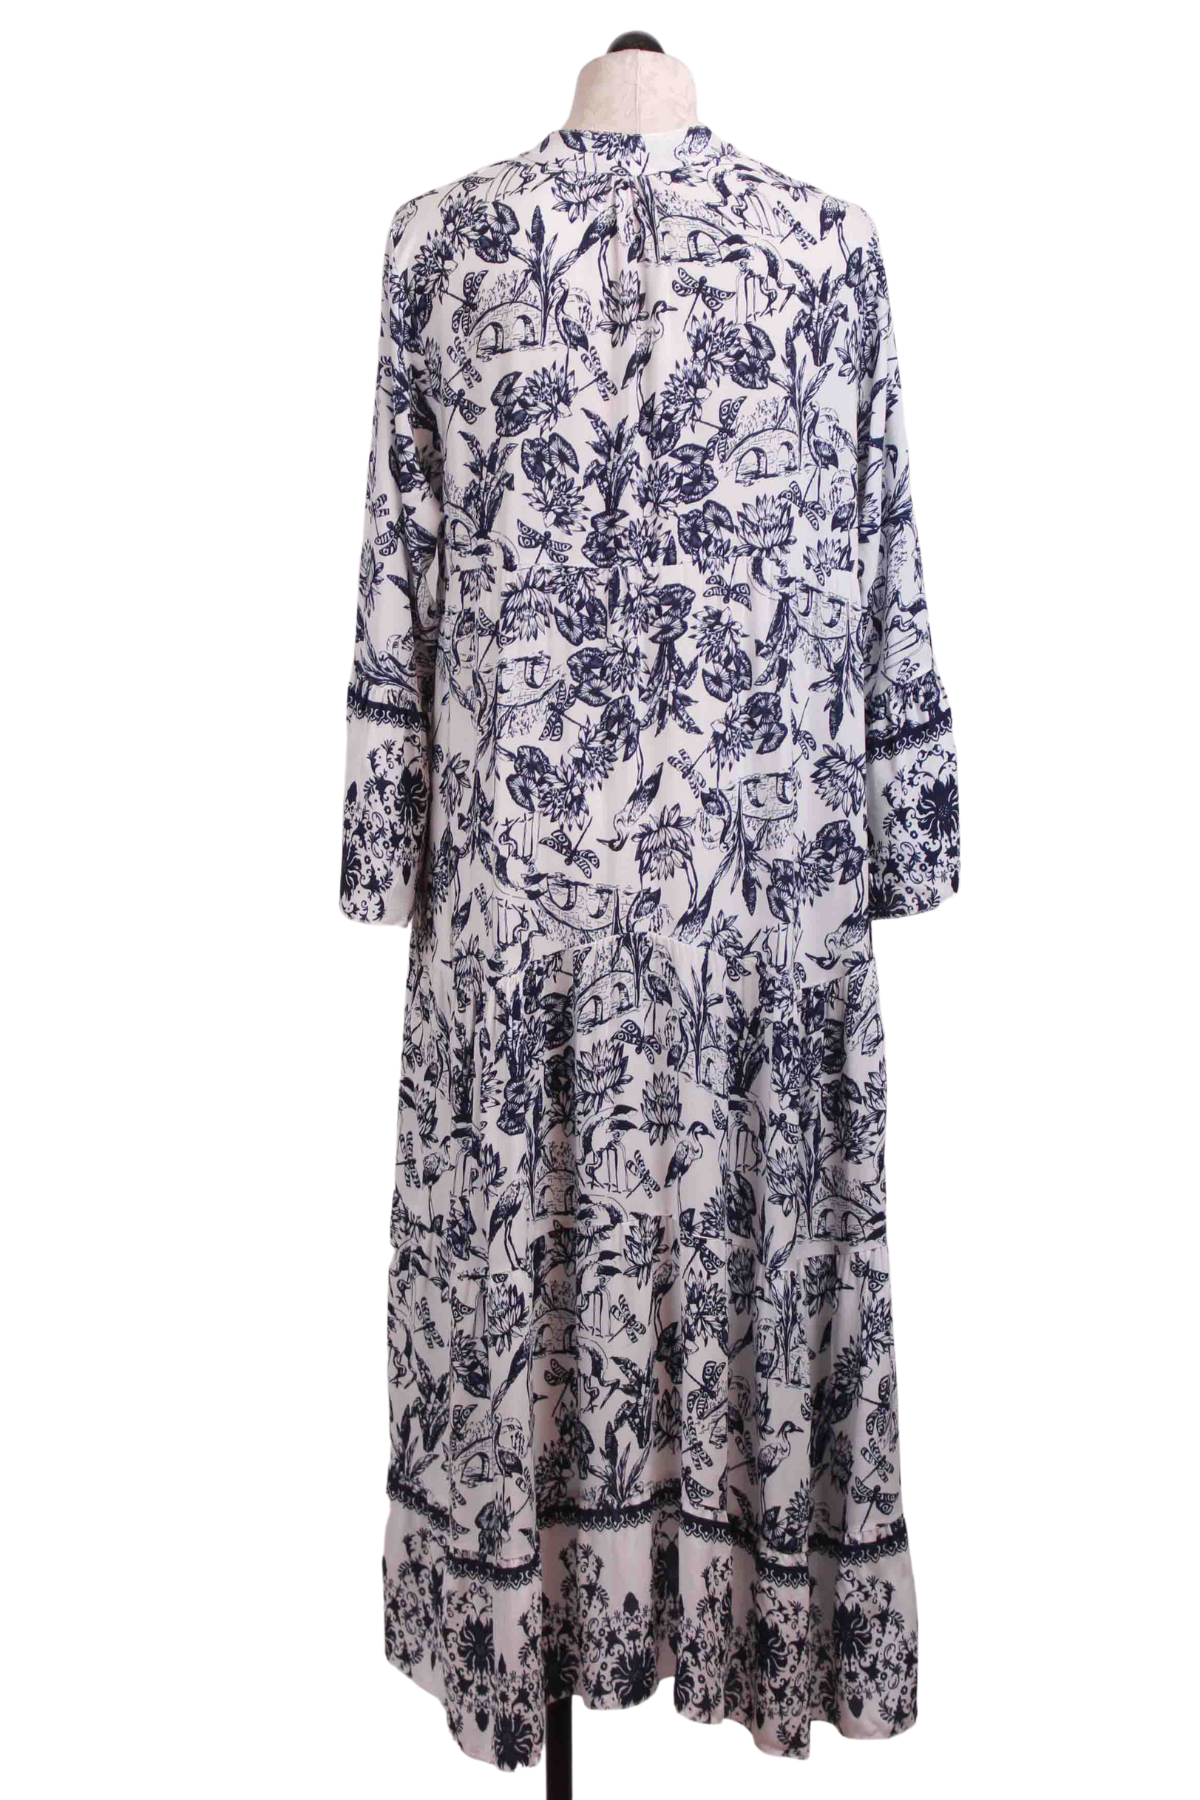 back view of Navy and White Floral Ruth Midi Length Dress by Scandal Italy